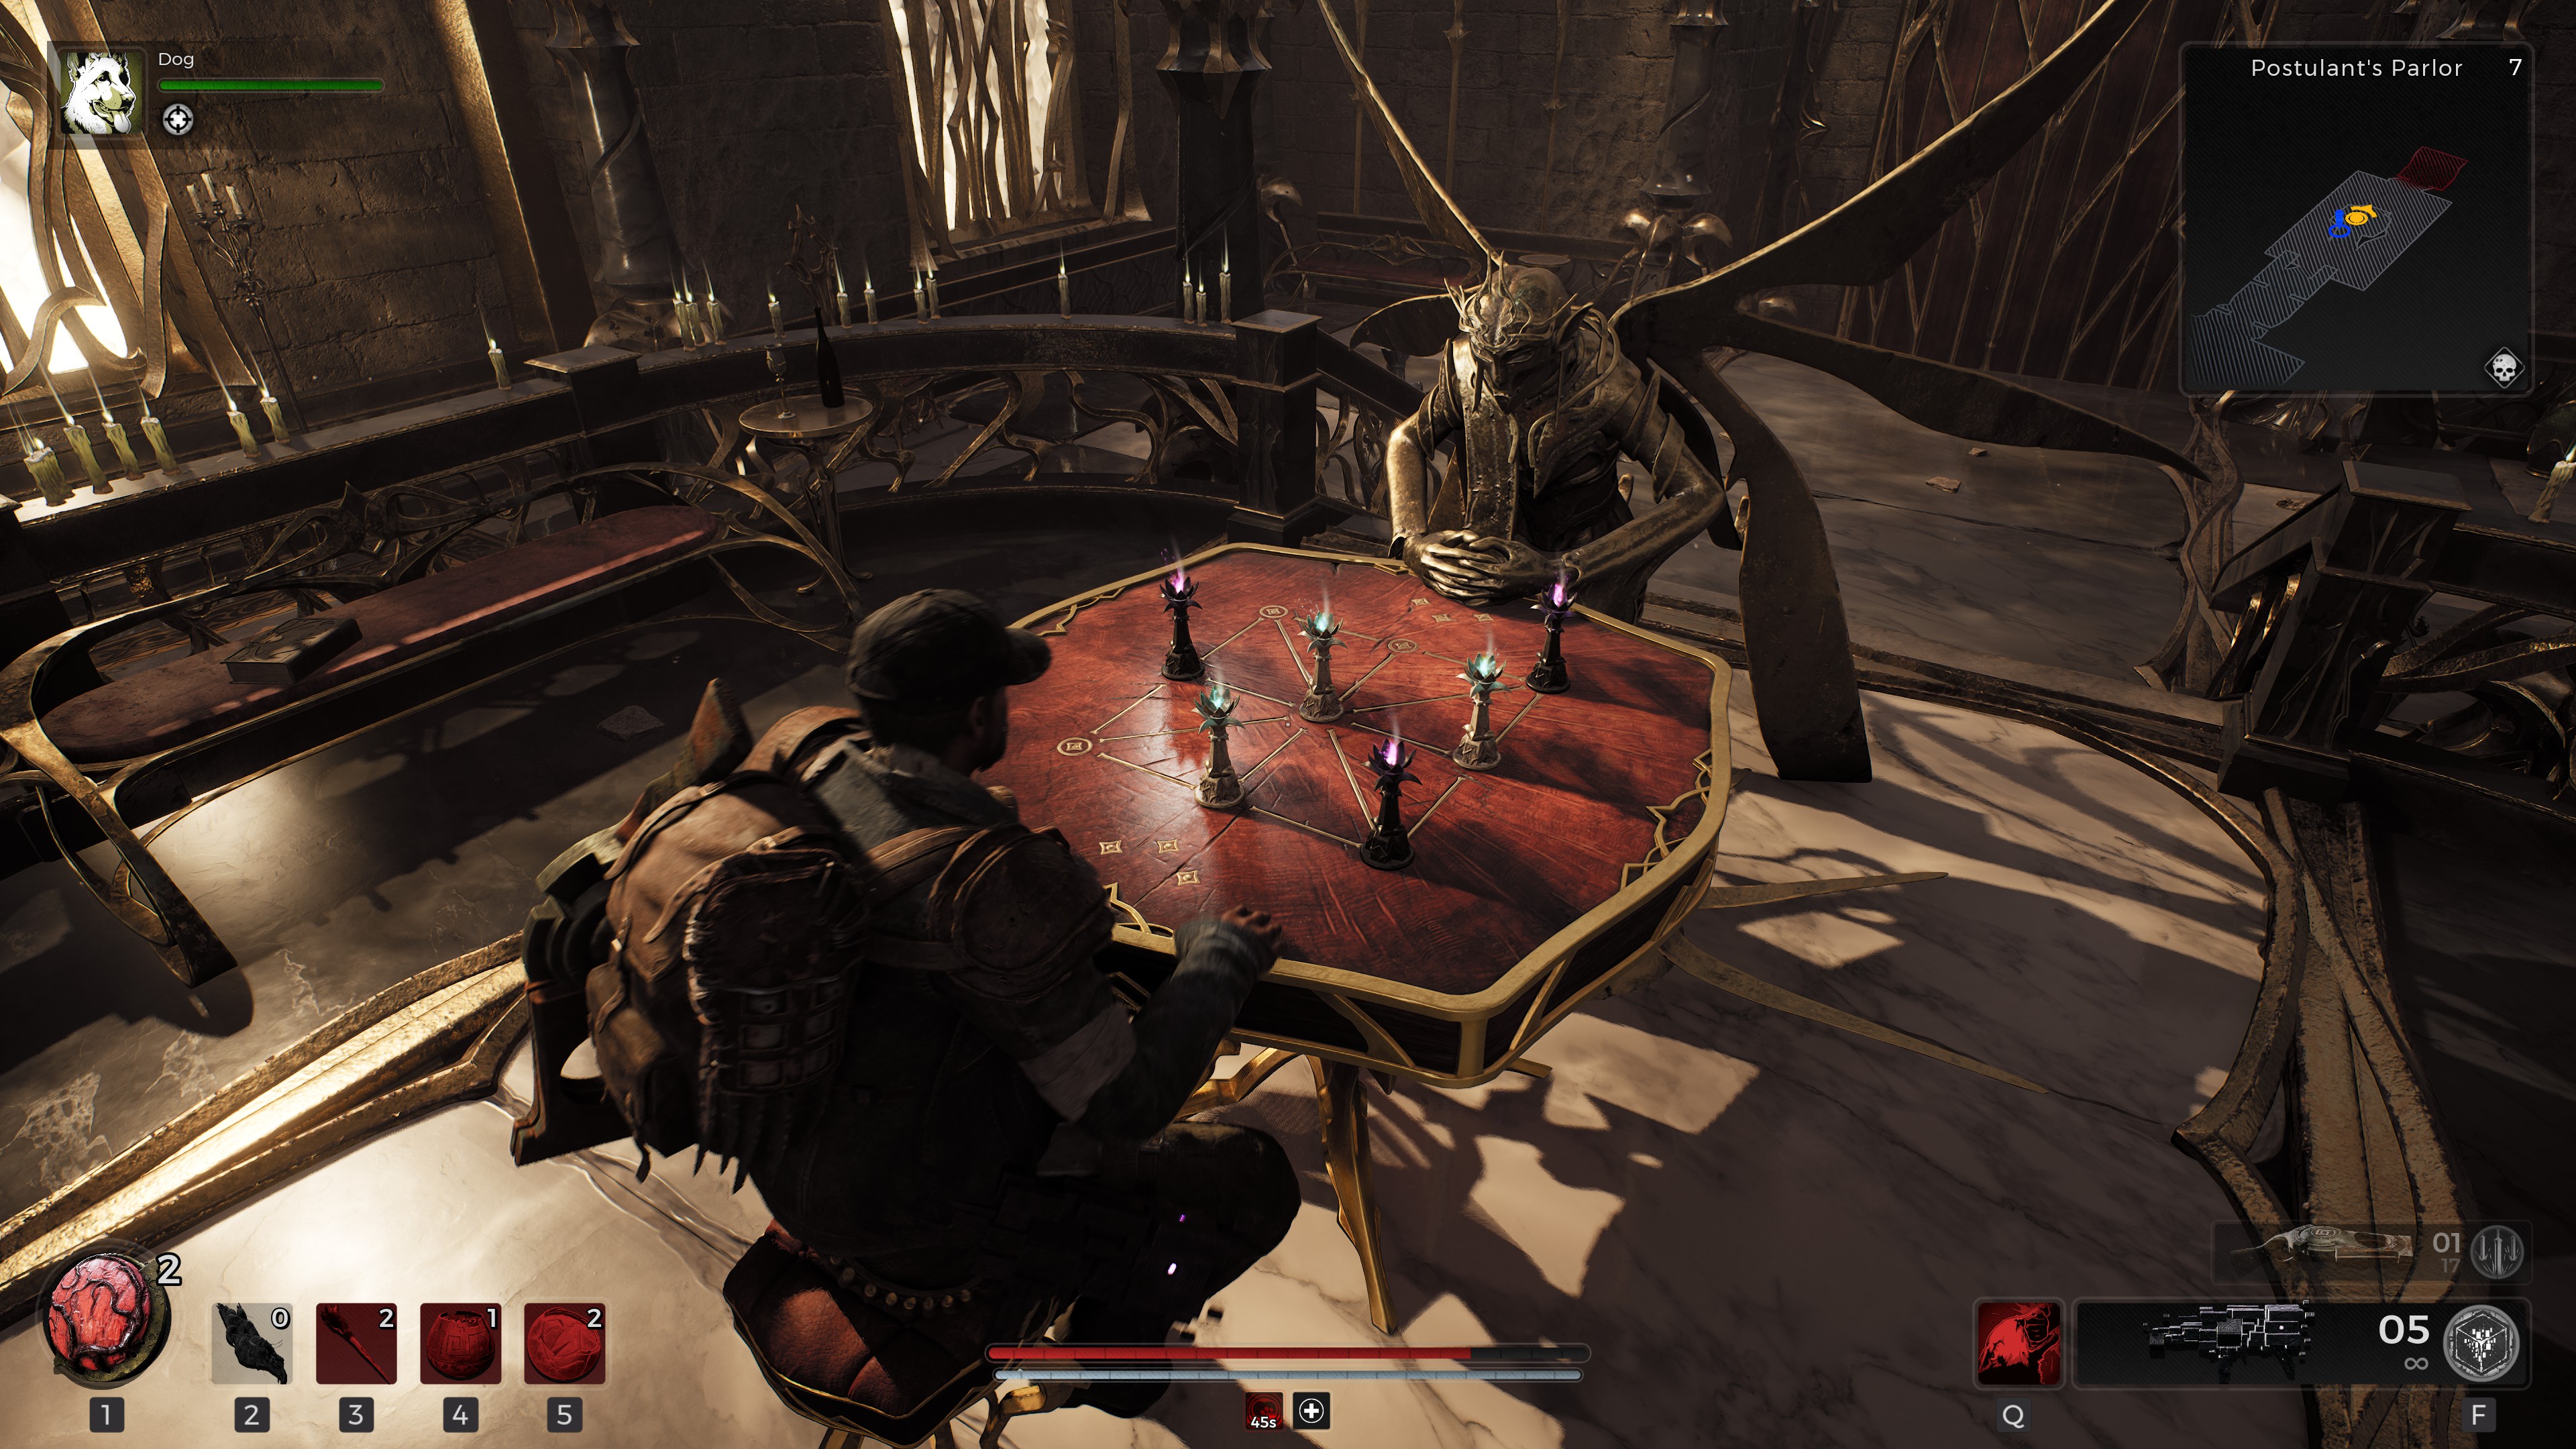 A character playing a strange board game against a monster in Remnant 2.